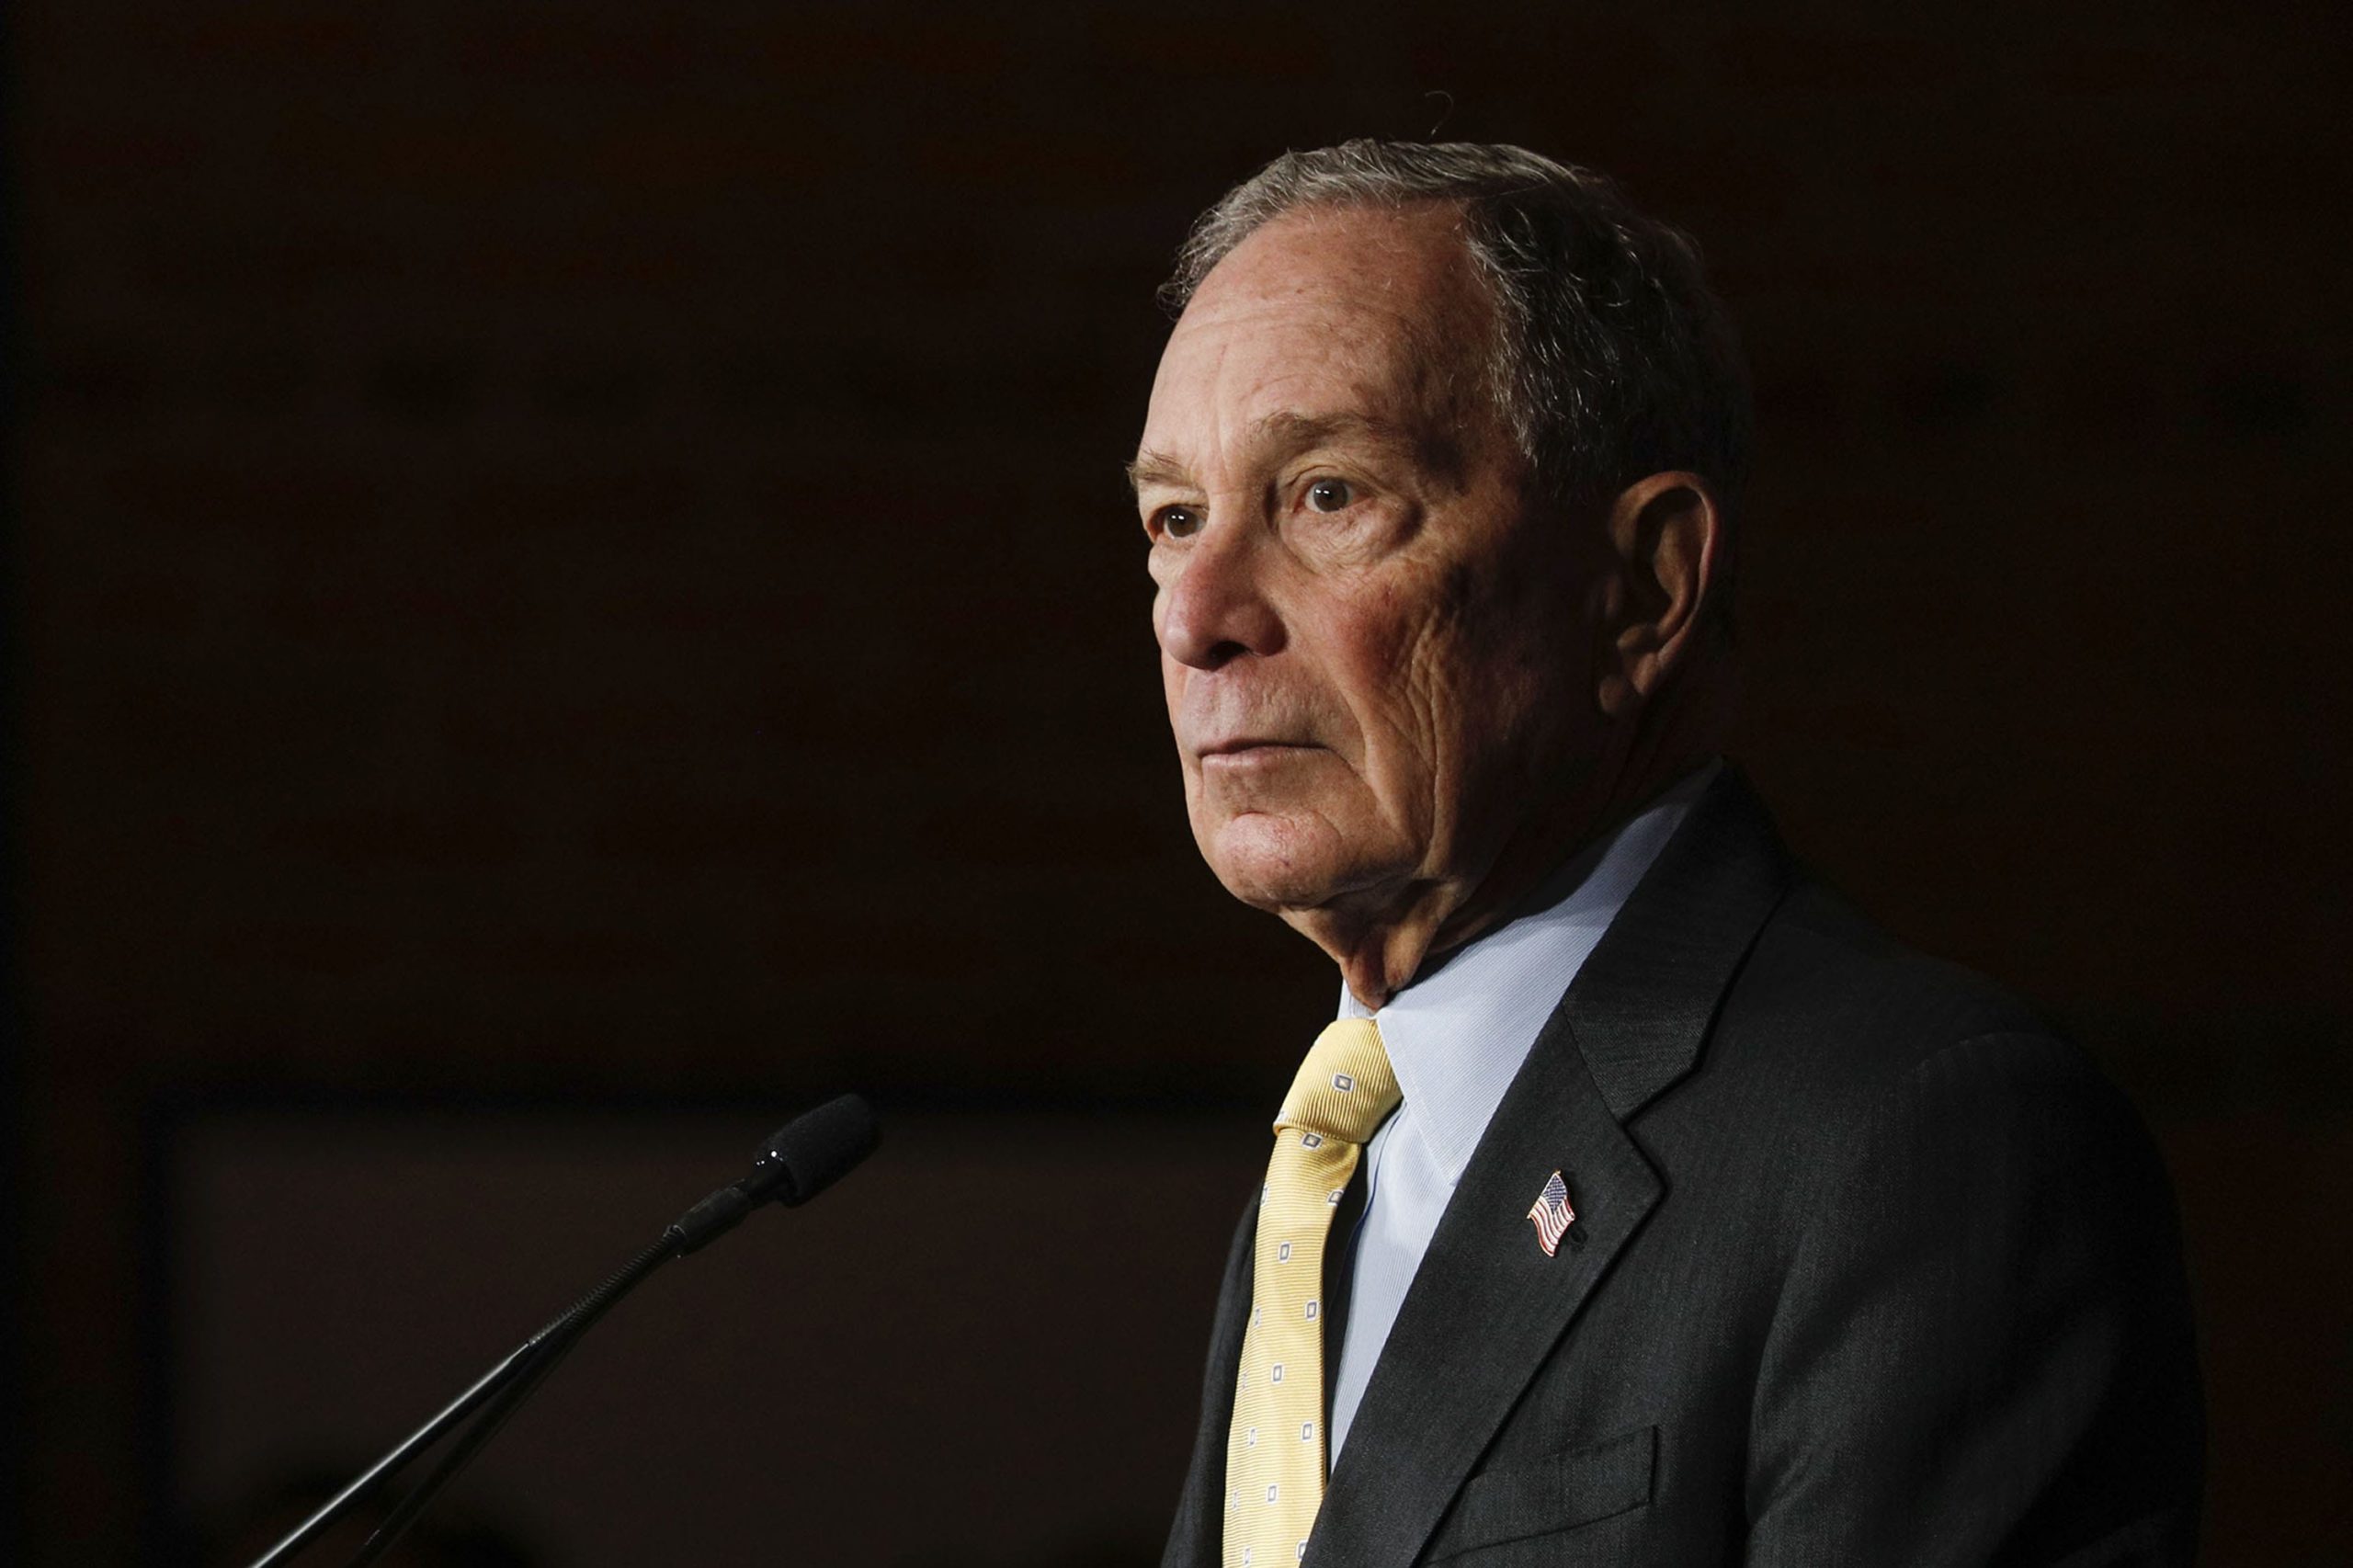 Bloomberg solely Democrat to prime Trump in Gallup ballot of small enterprise homeowners